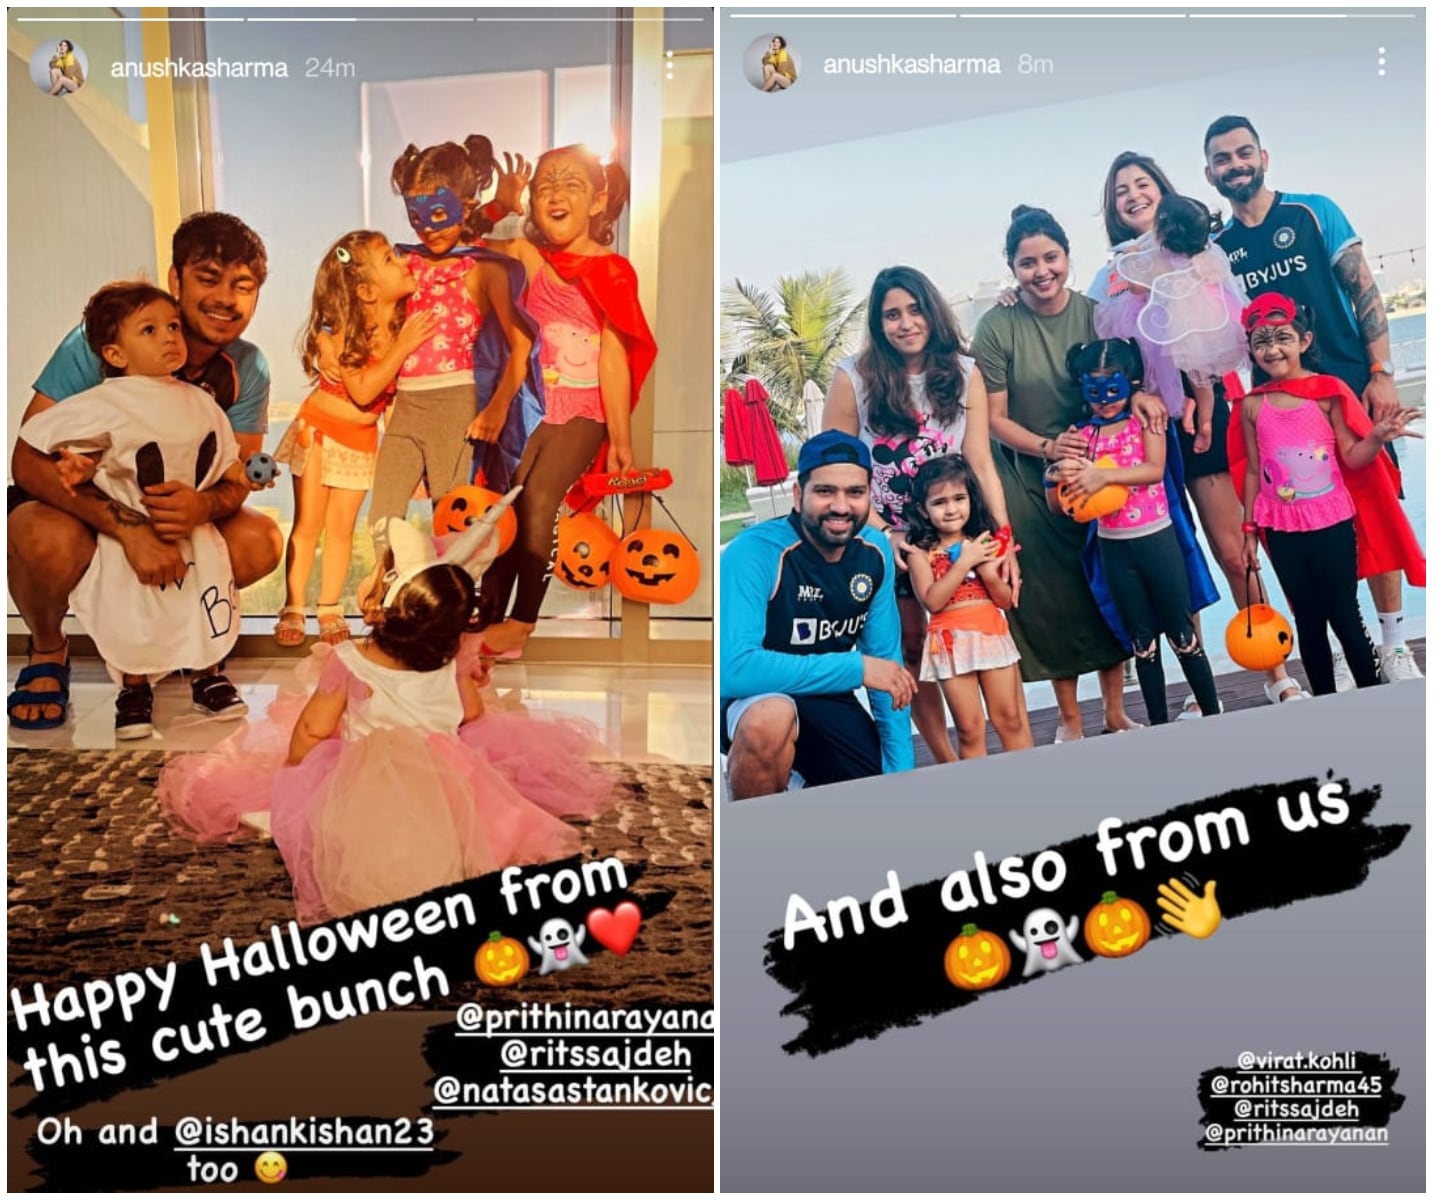 Anushka Sharma shared pictures from their Halloween celebrations on Instagram Stories.